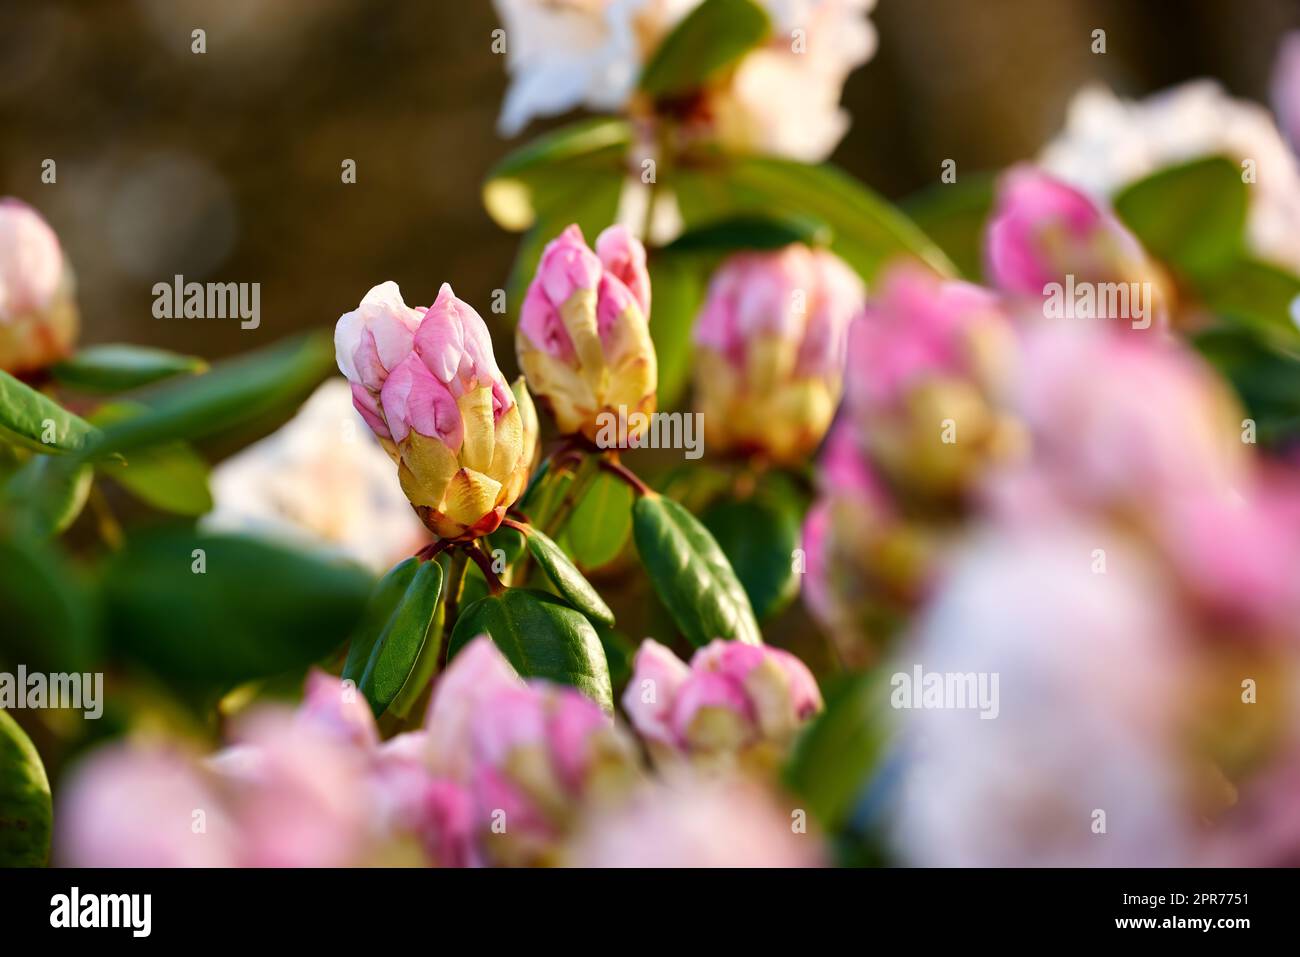 Closeup of blooming Rhododendron flowers in the garden at home. Zoomed in on blossoming group of woody plants growing in the backyard in summer. Beautiful pink and white elegant flower on green trees Stock Photo